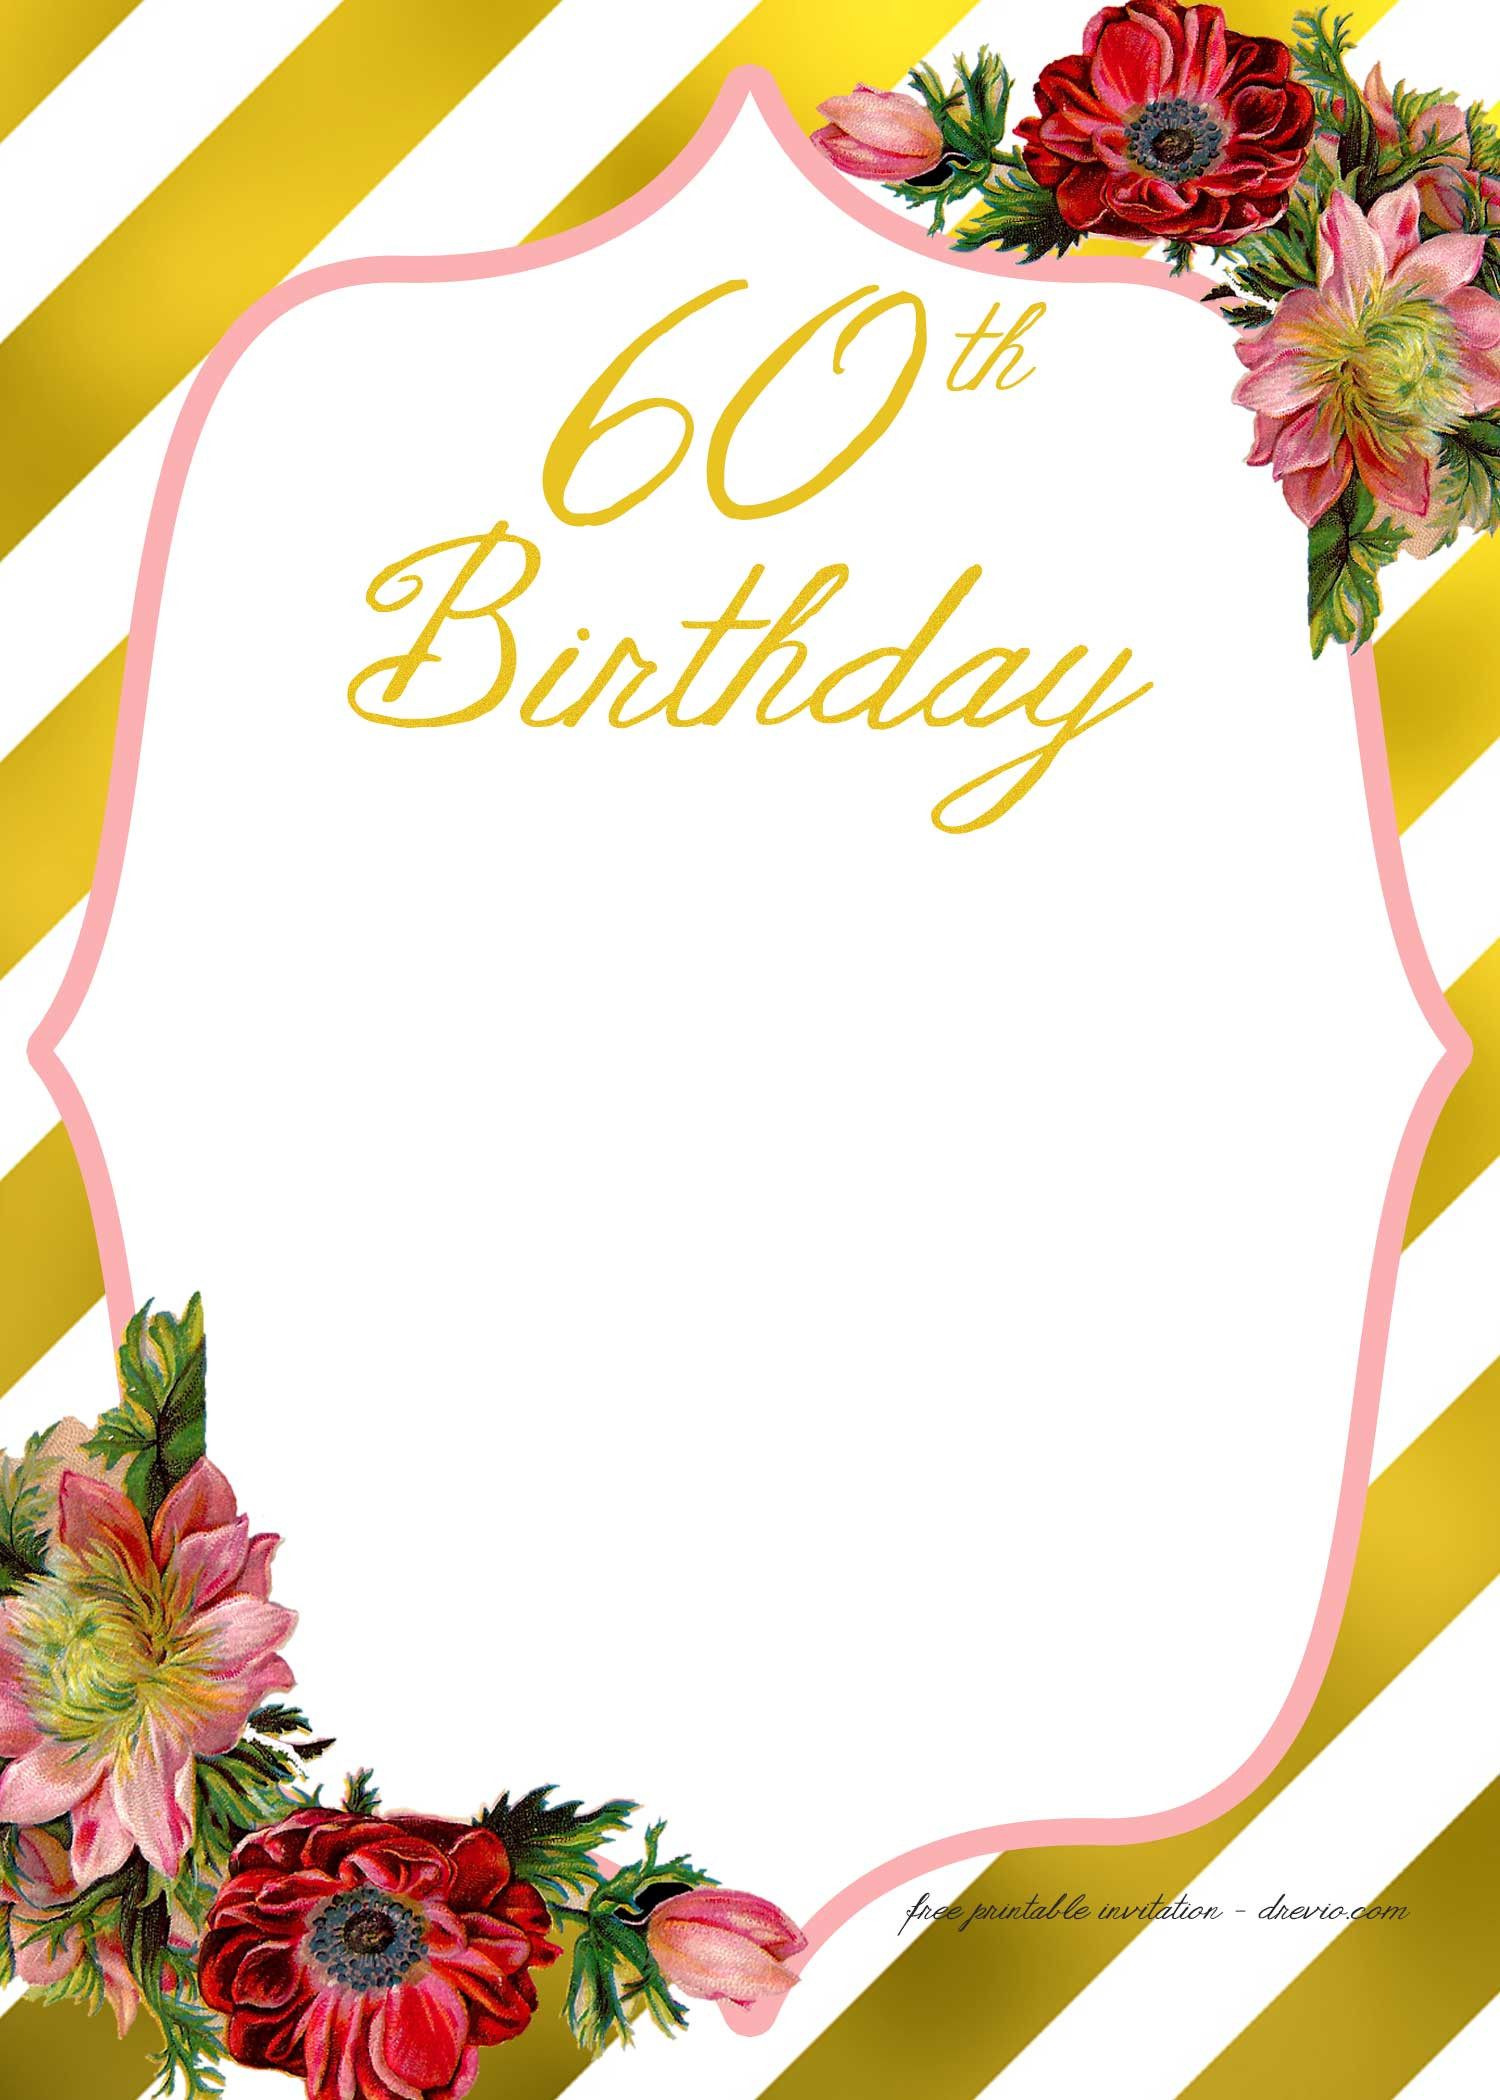 Free Templates For Birthday Invitations
 Adult Birthday Invitations Template for 50th years old